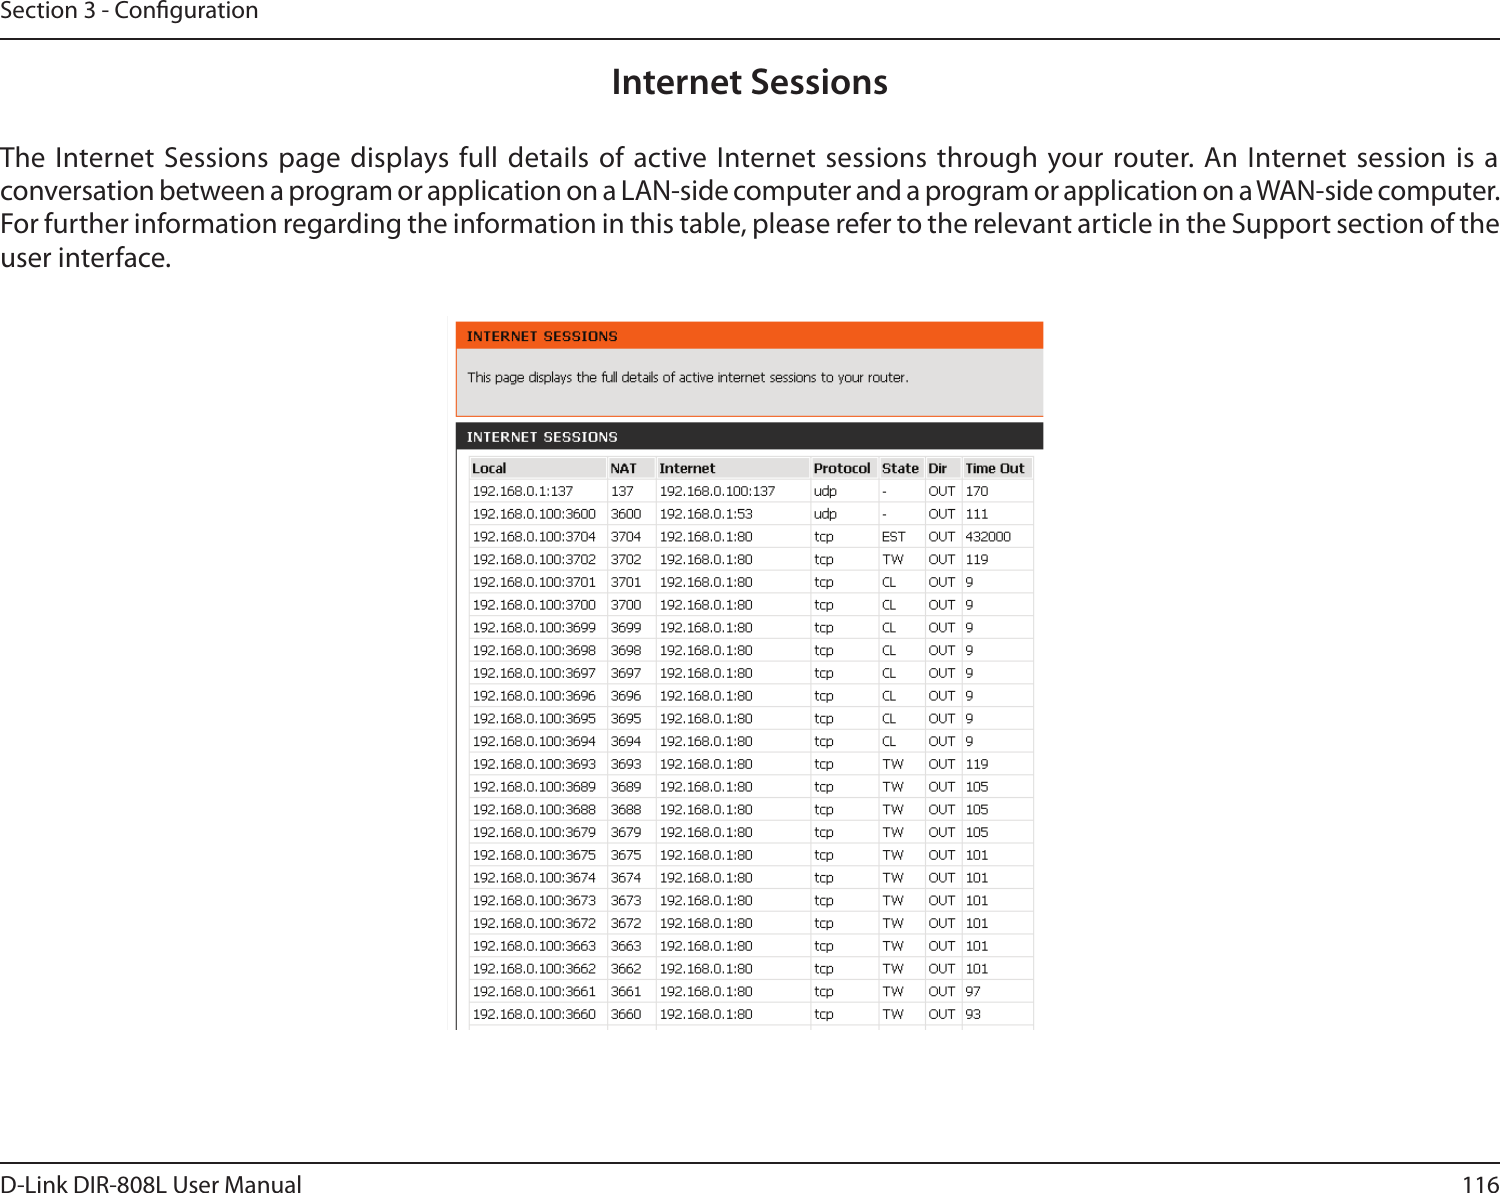 116D-Link DIR-808L User ManualSection 3 - CongurationInternet SessionsThe Internet Sessions page displays full  details of  active Internet sessions through your router. An Internet session is a conversation between a program or application on a LAN-side computer and a program or application on a WAN-side computer. For further information regarding the information in this table, please refer to the relevant article in the Support section of the user interface.  